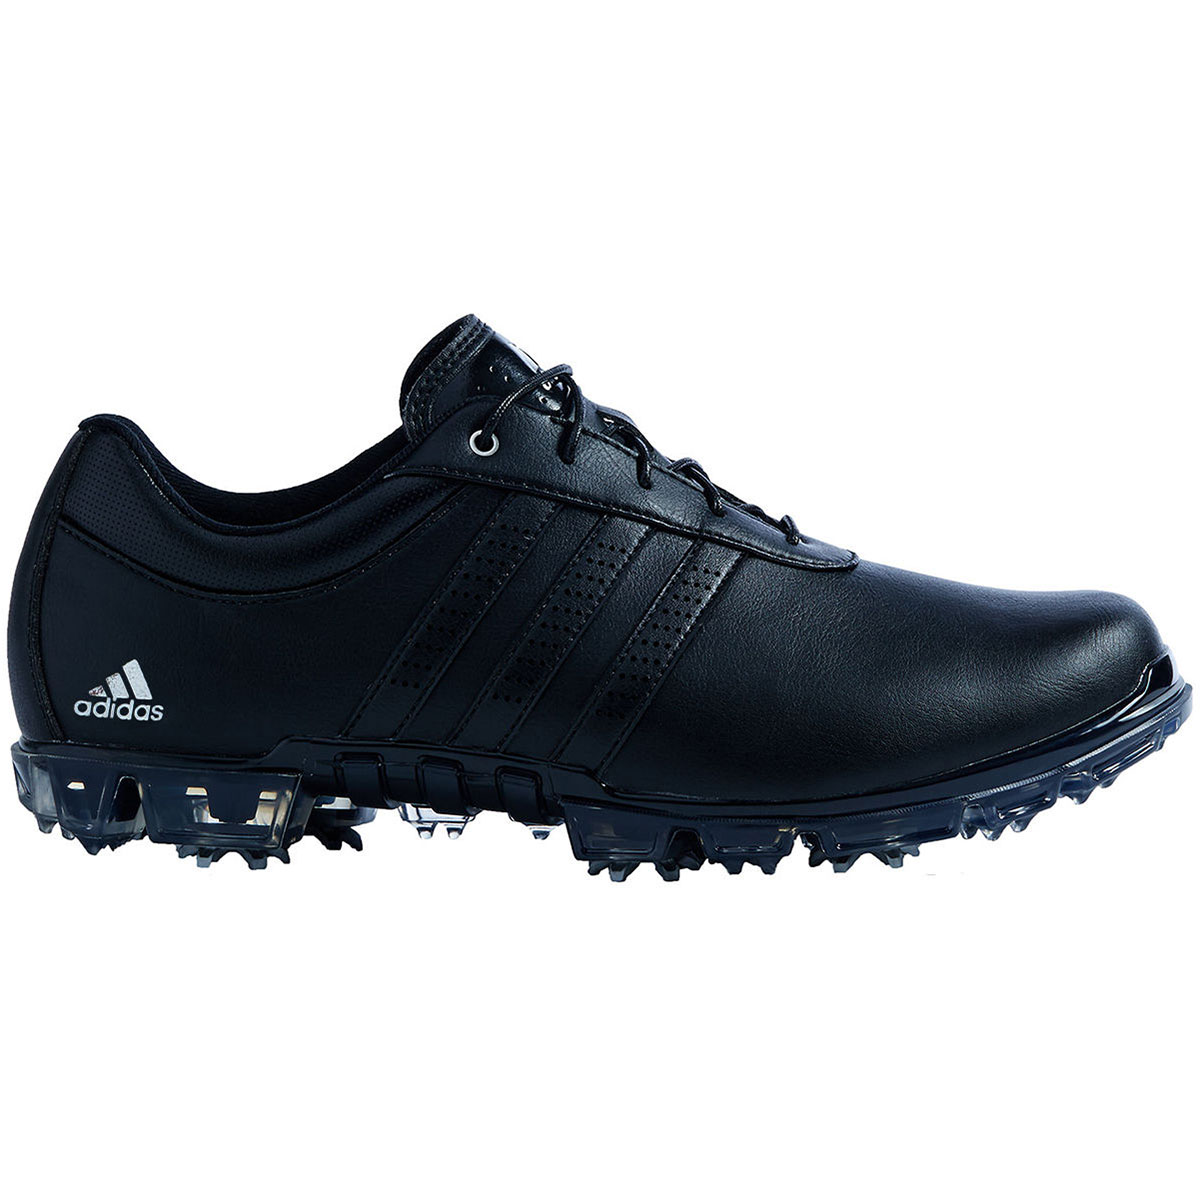 adidas Golf Adipure Flex shoes from 